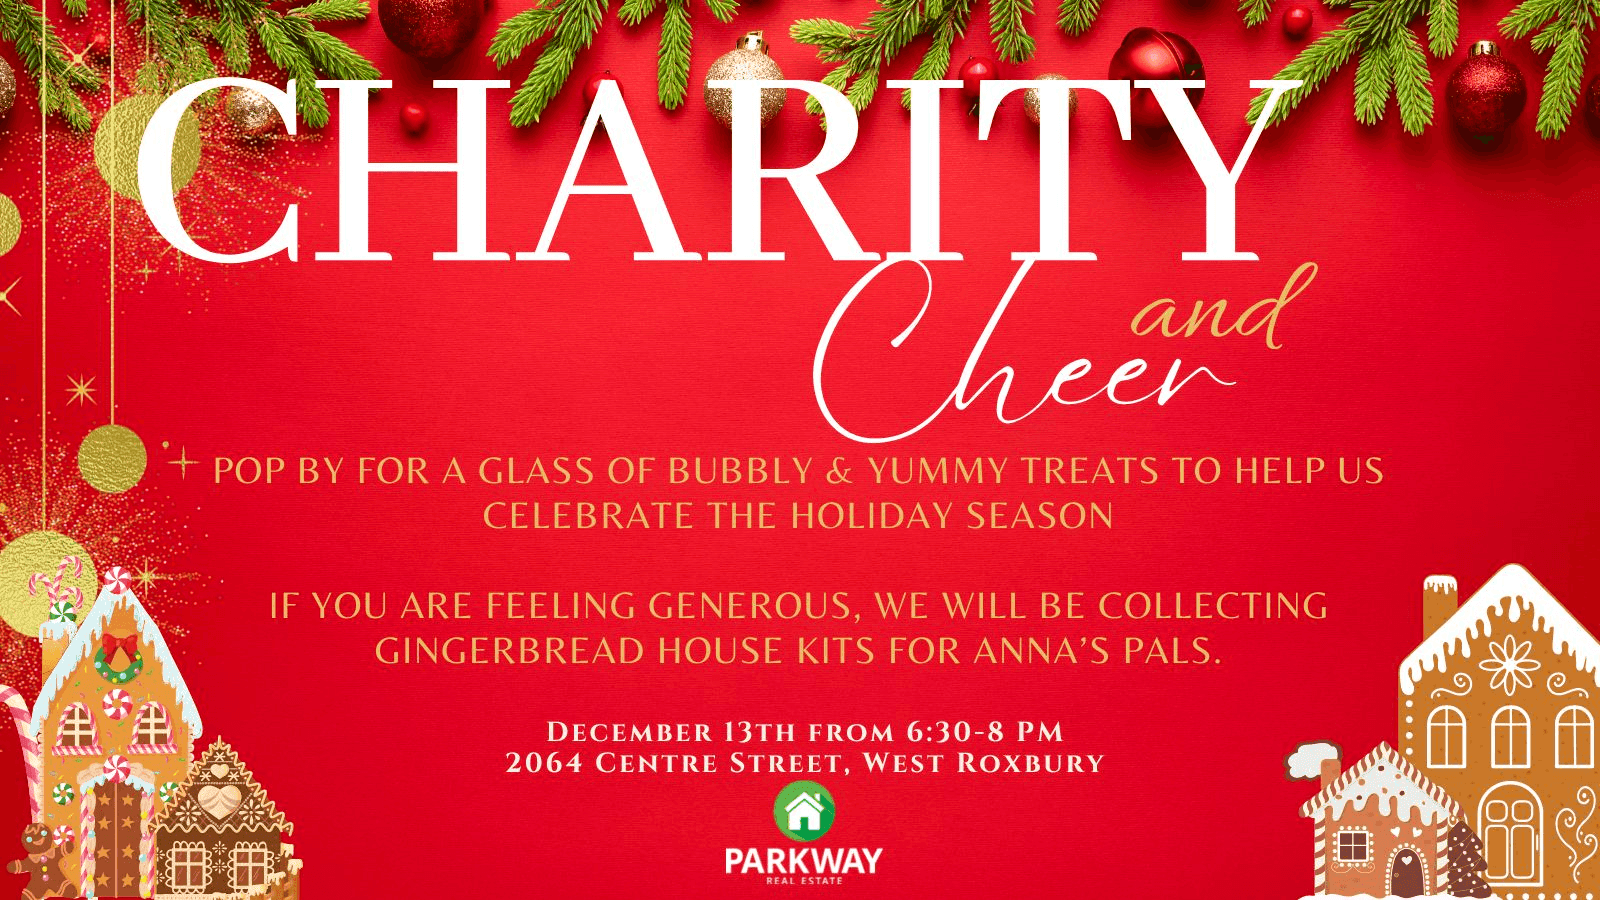 Parkway real estate charity and cheer